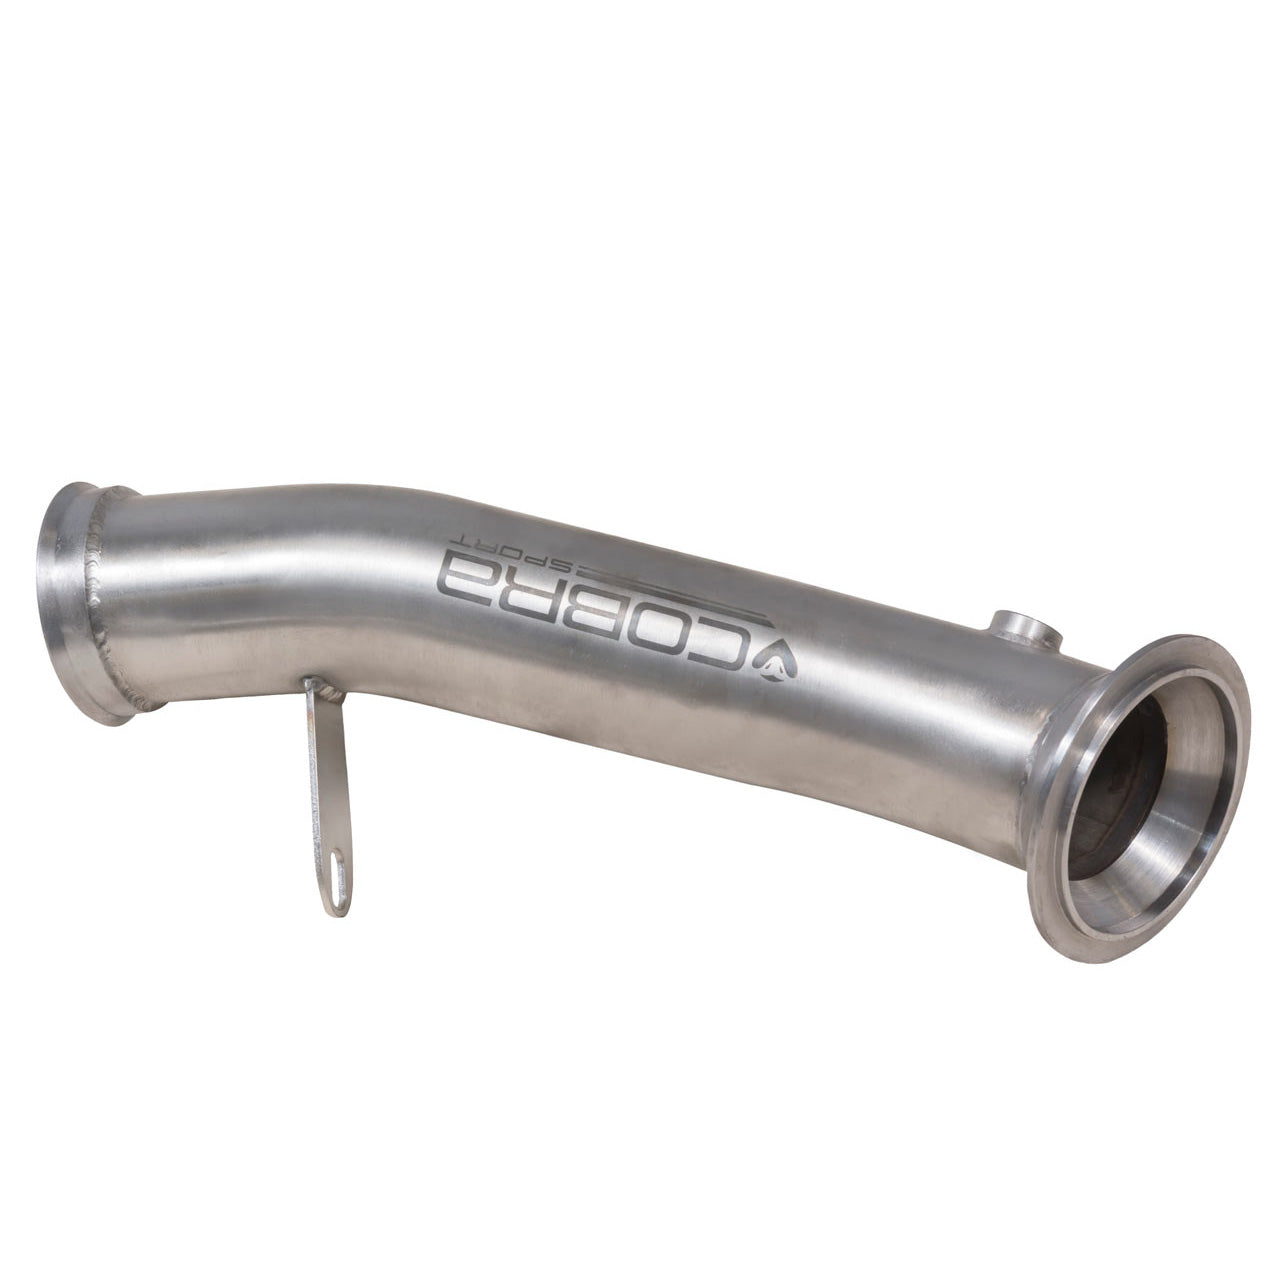 BMW M235i Cabriolet (F23) Front Downpipe Sports Cat / De-Cat Performance Exhaust - Wayside Performance 